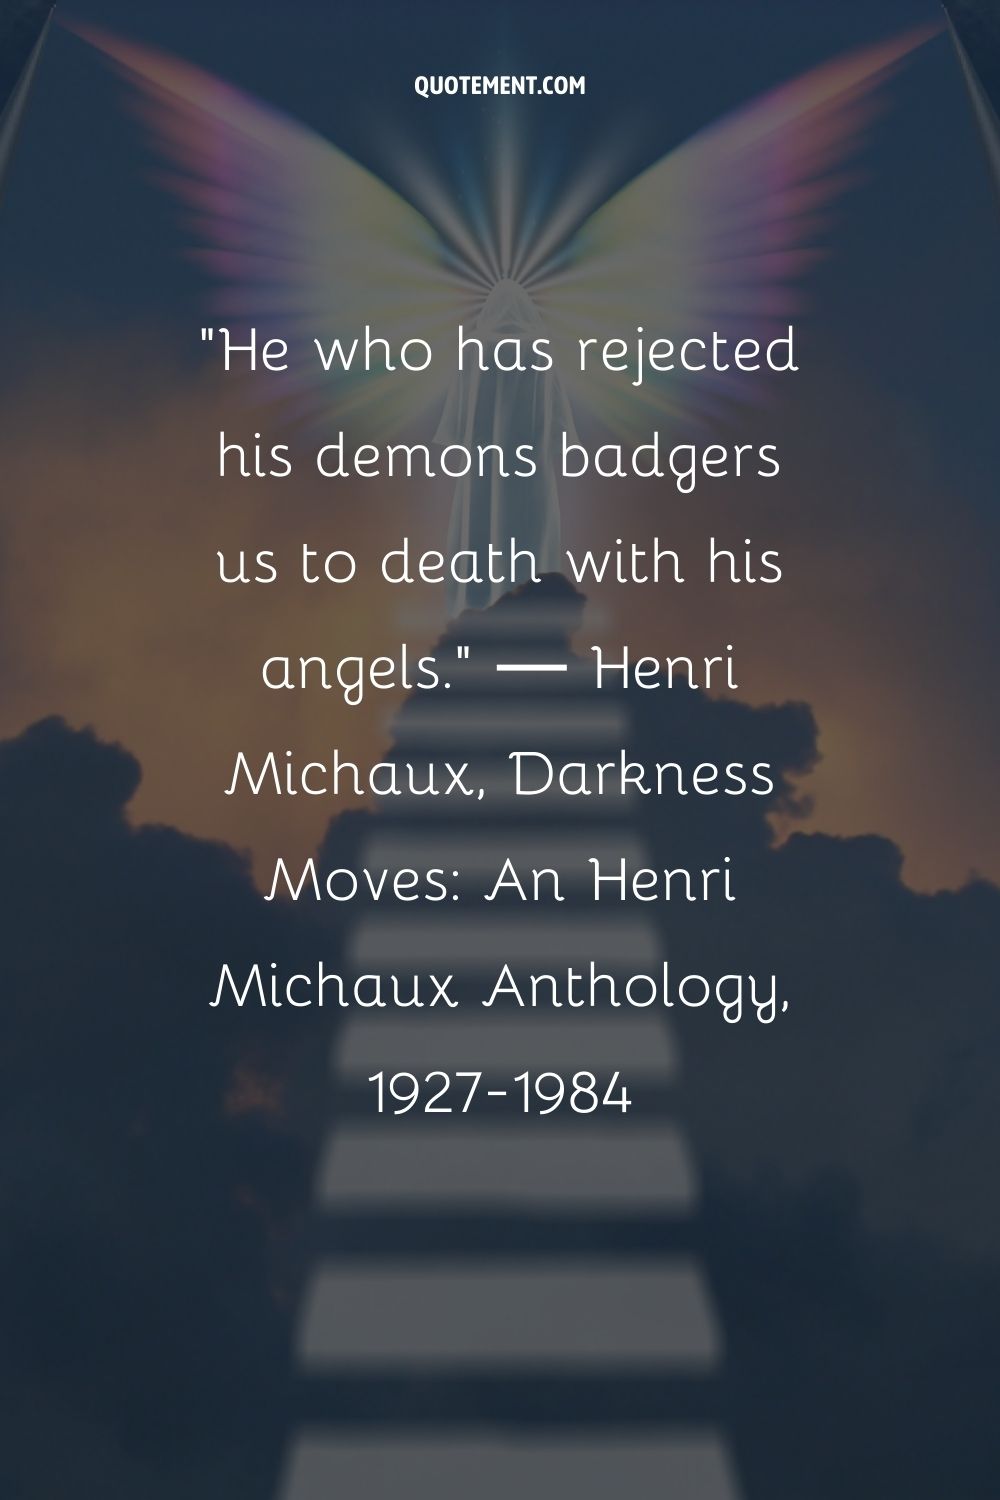 He who has rejected his demons badgers us to death with his angels.